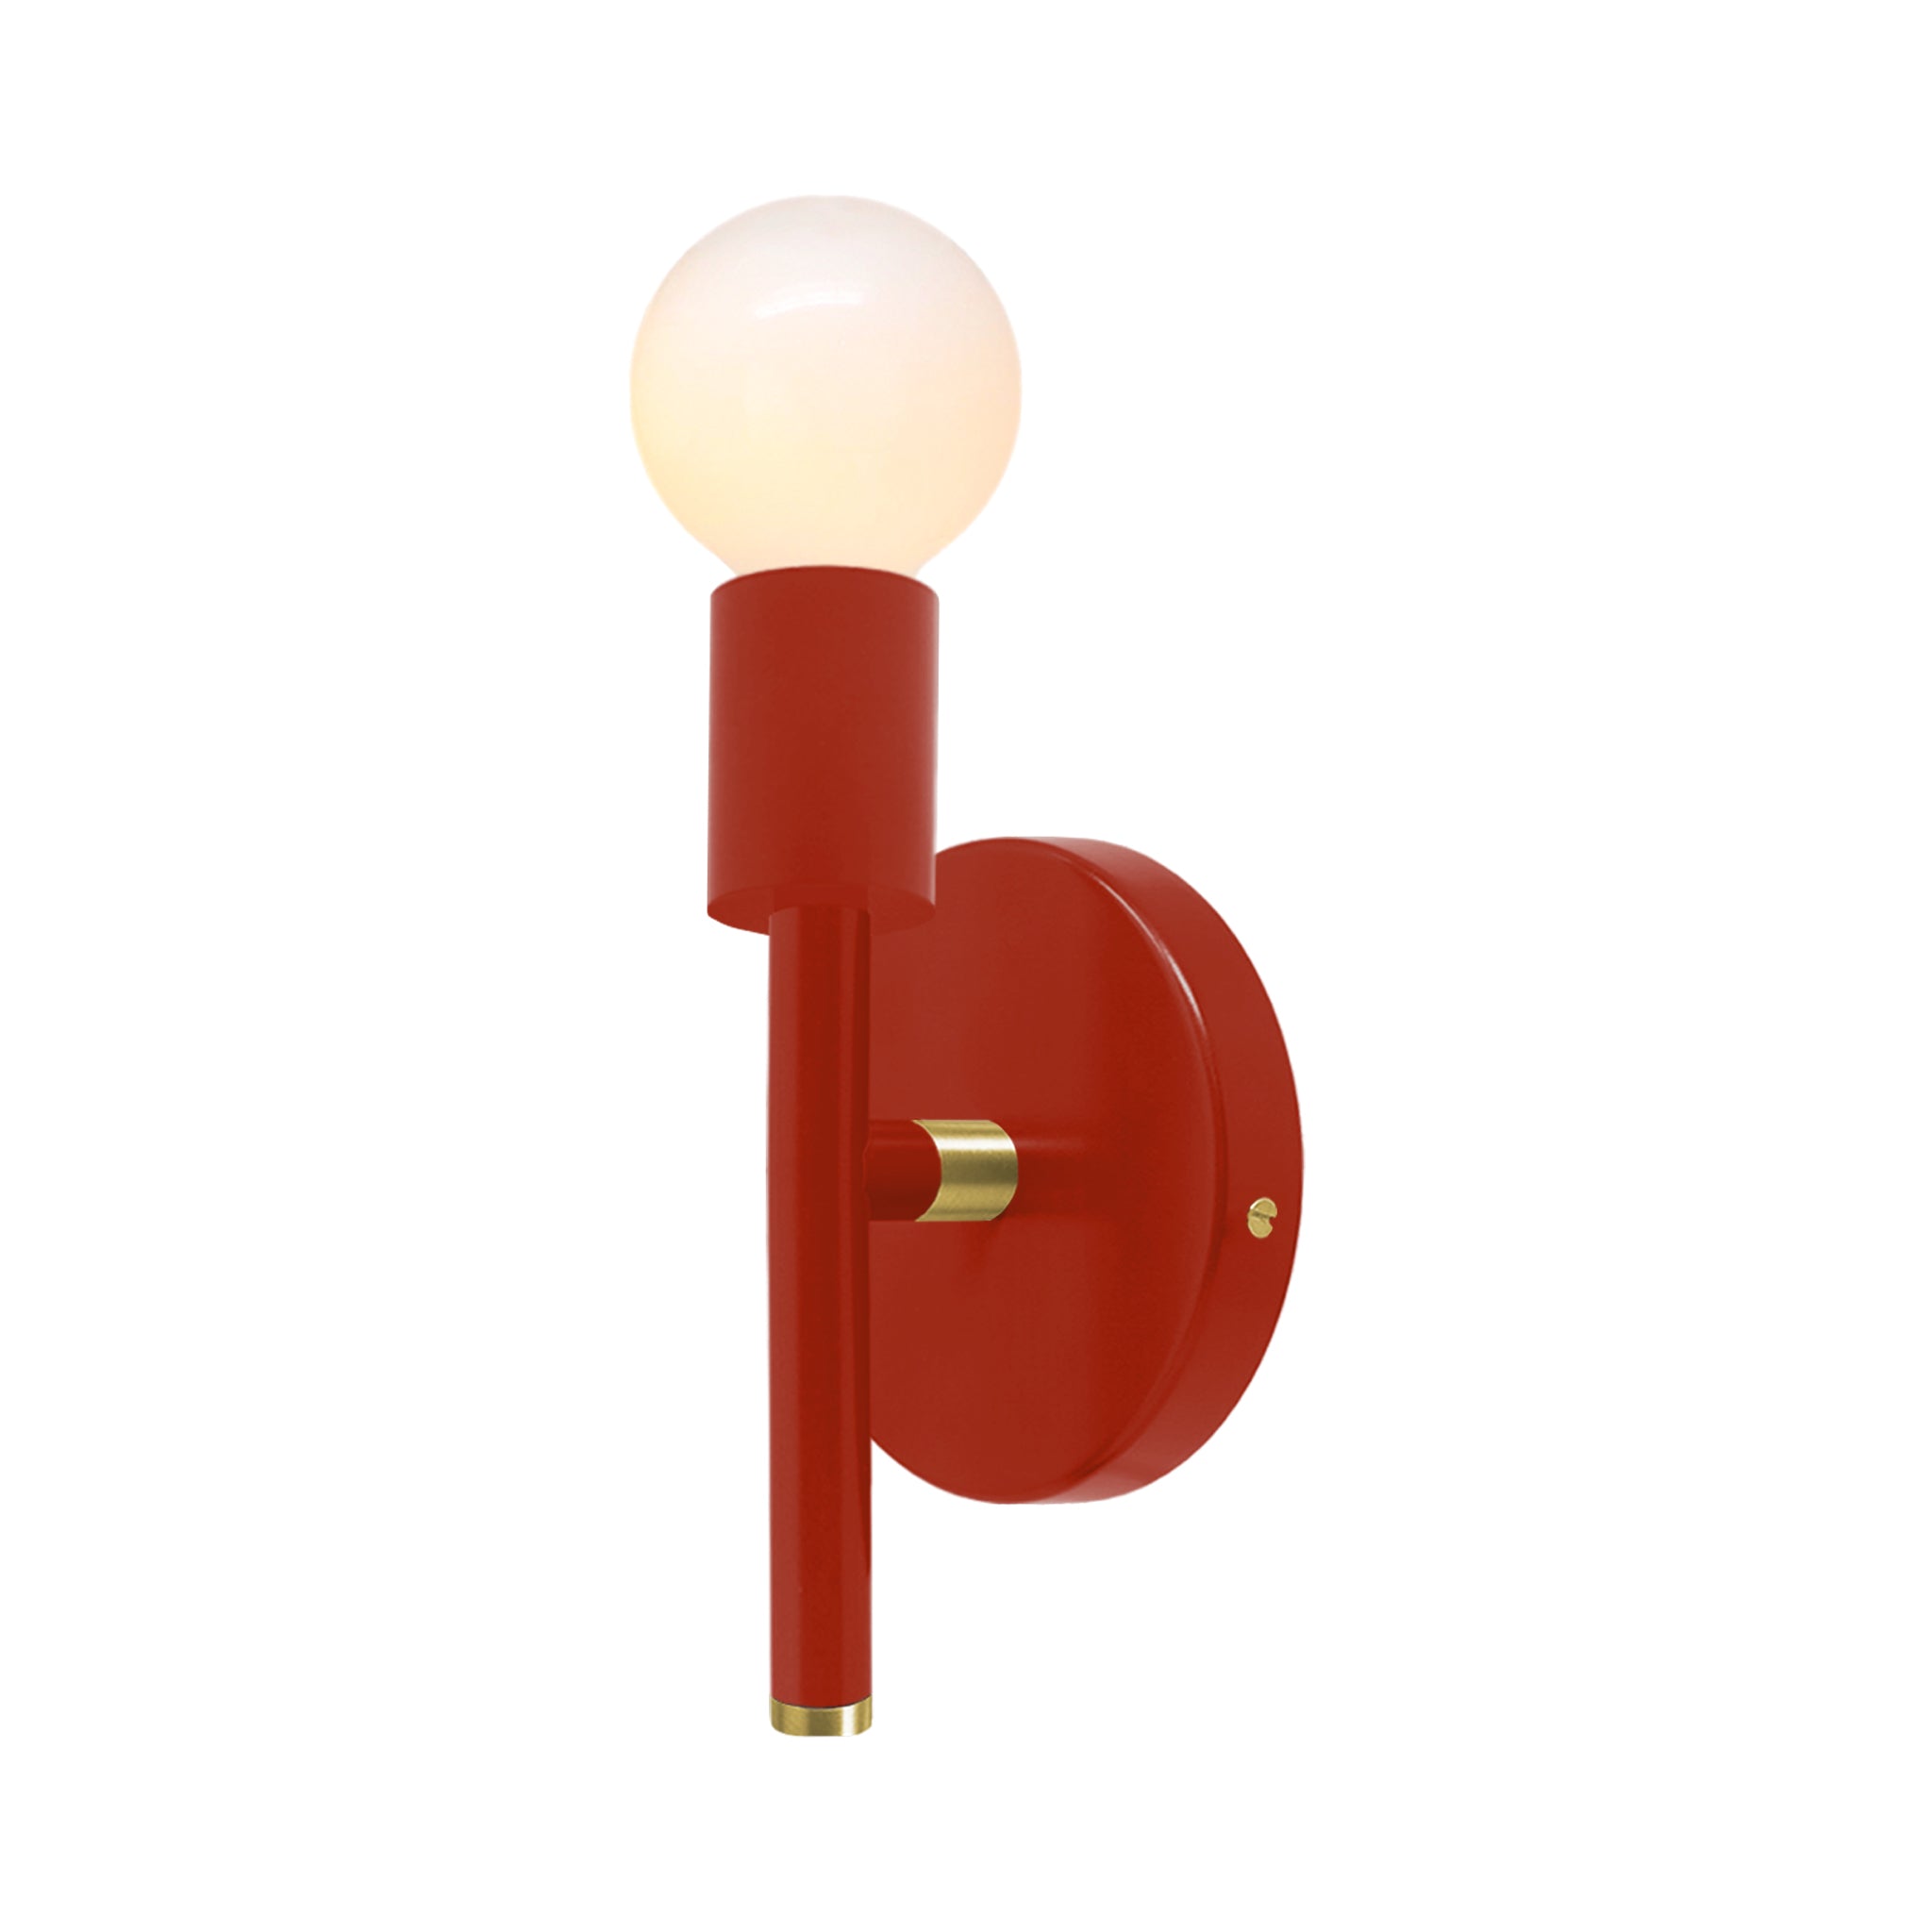 Brass and riding hood red color Major sconce 9" Dutton Brown lighting